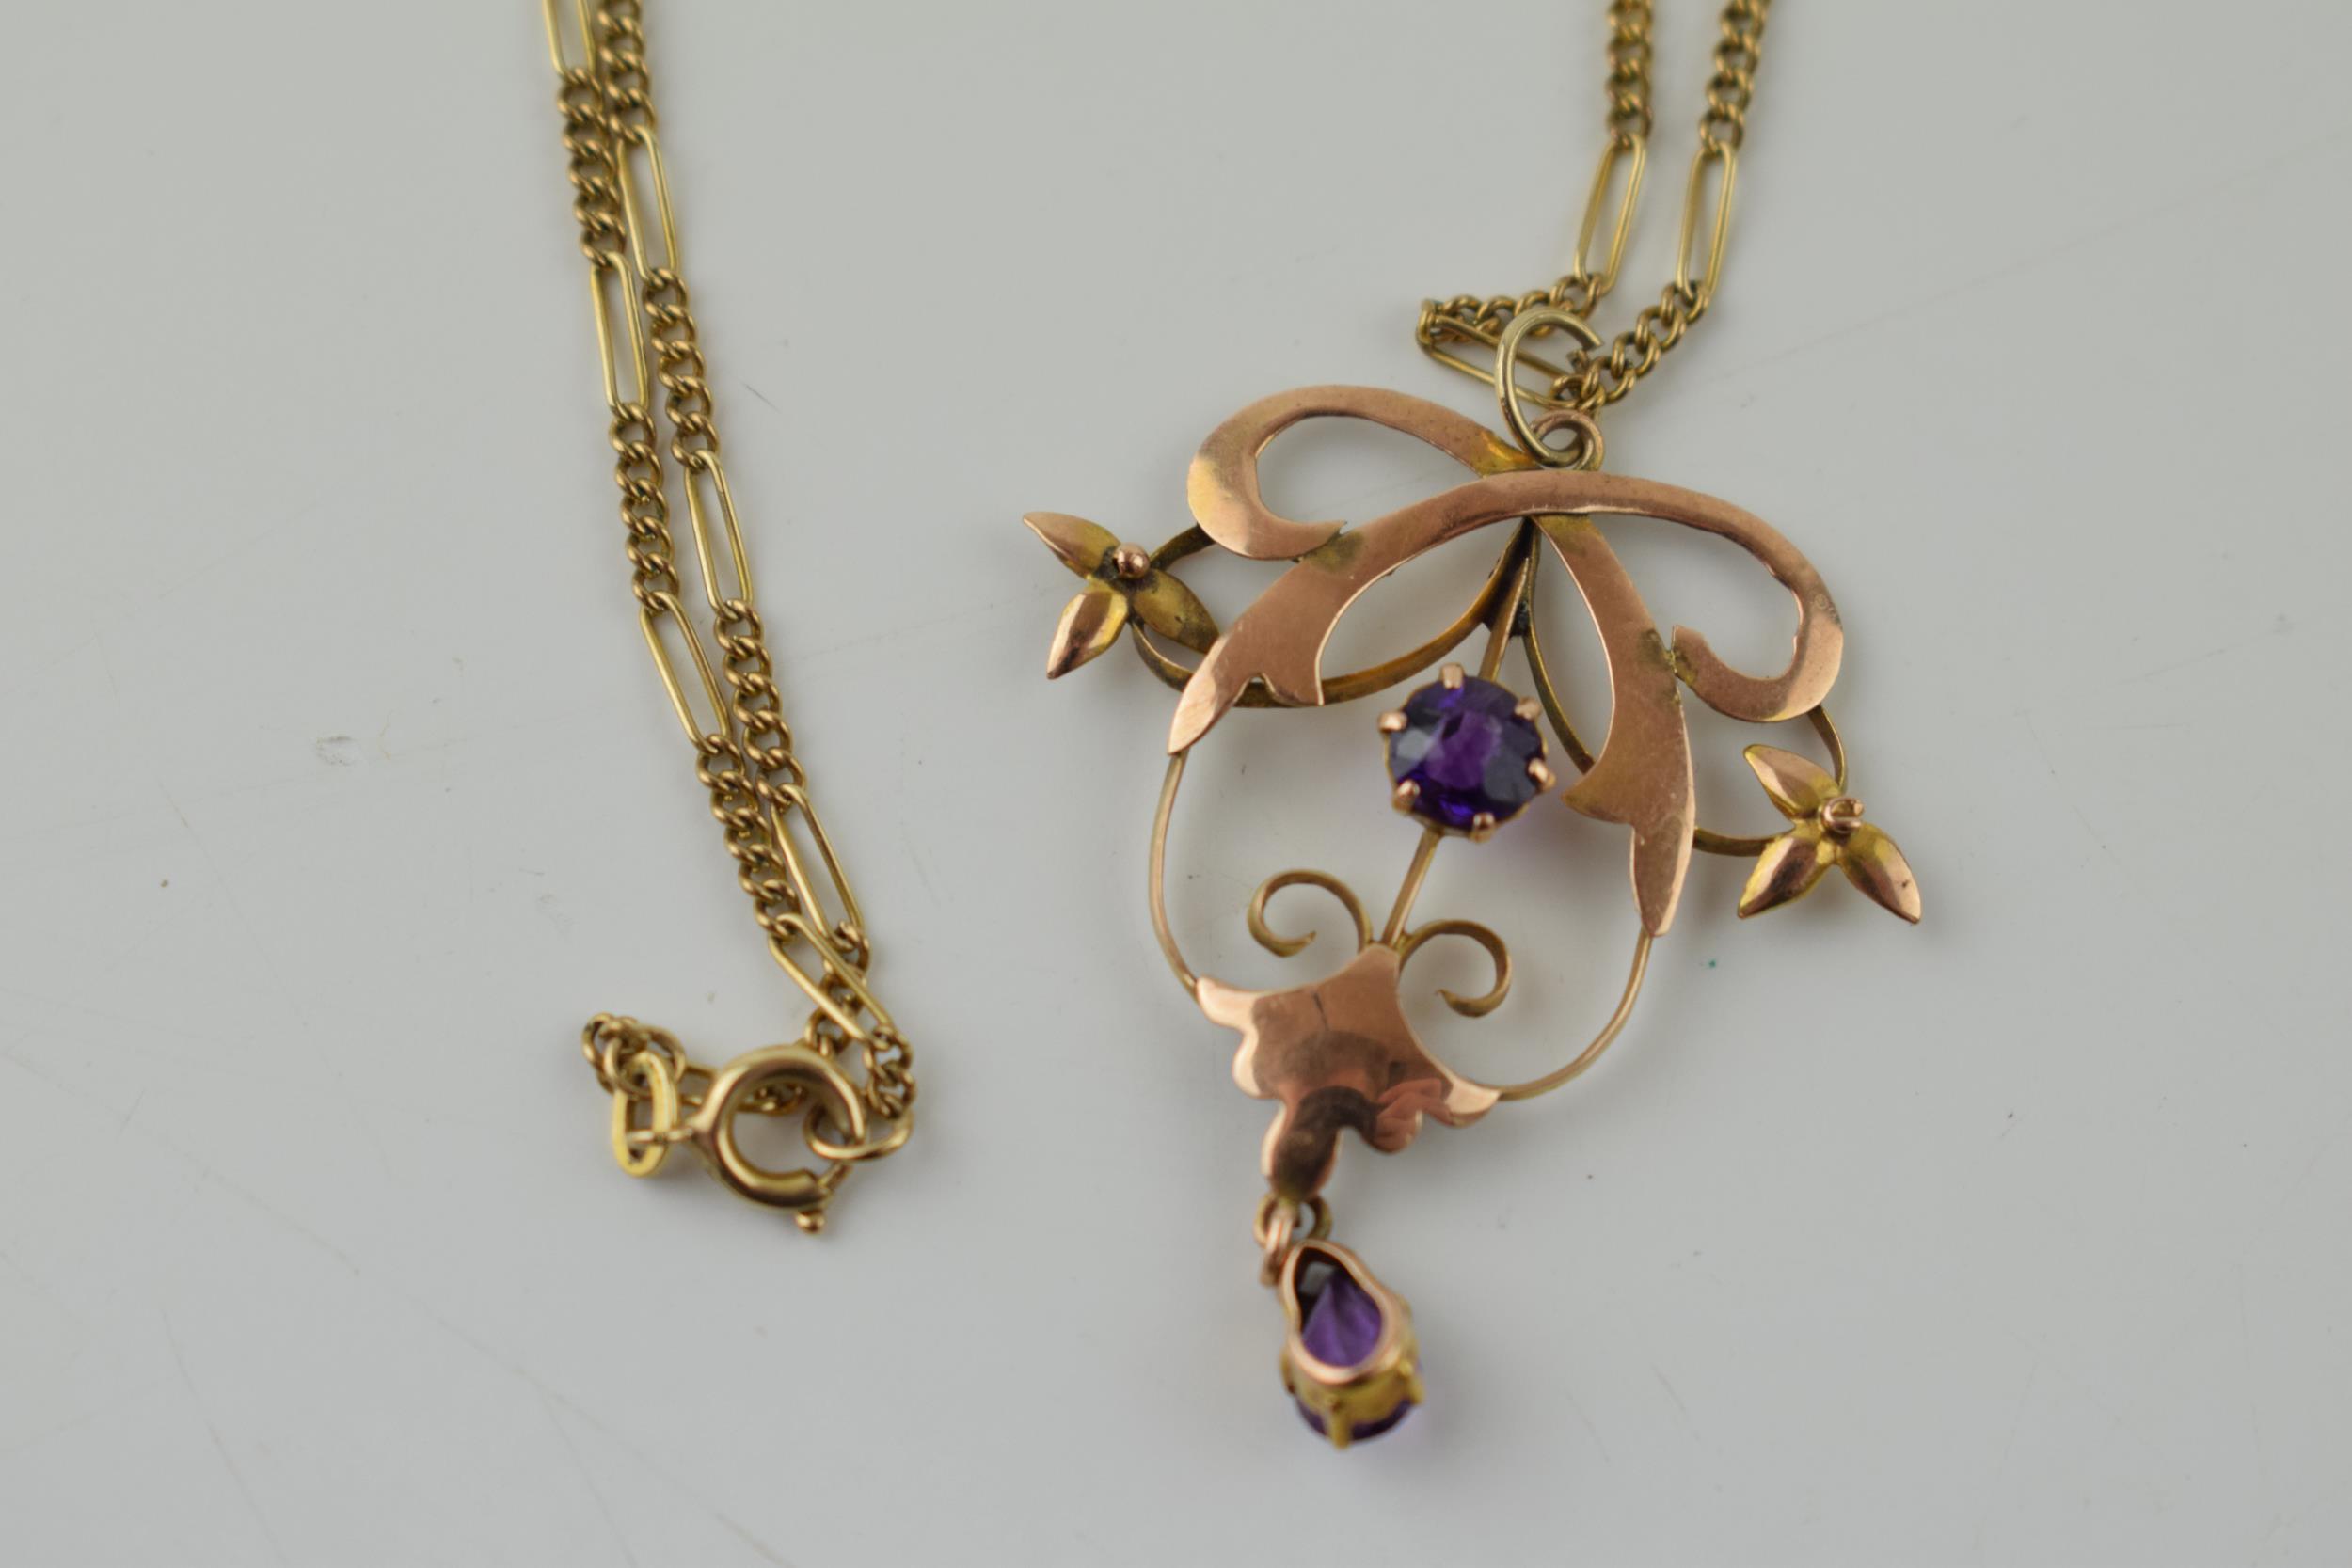 Edwardian 9ct gold pendant and chain, set amethysts, 4.2 grams. - Image 2 of 2